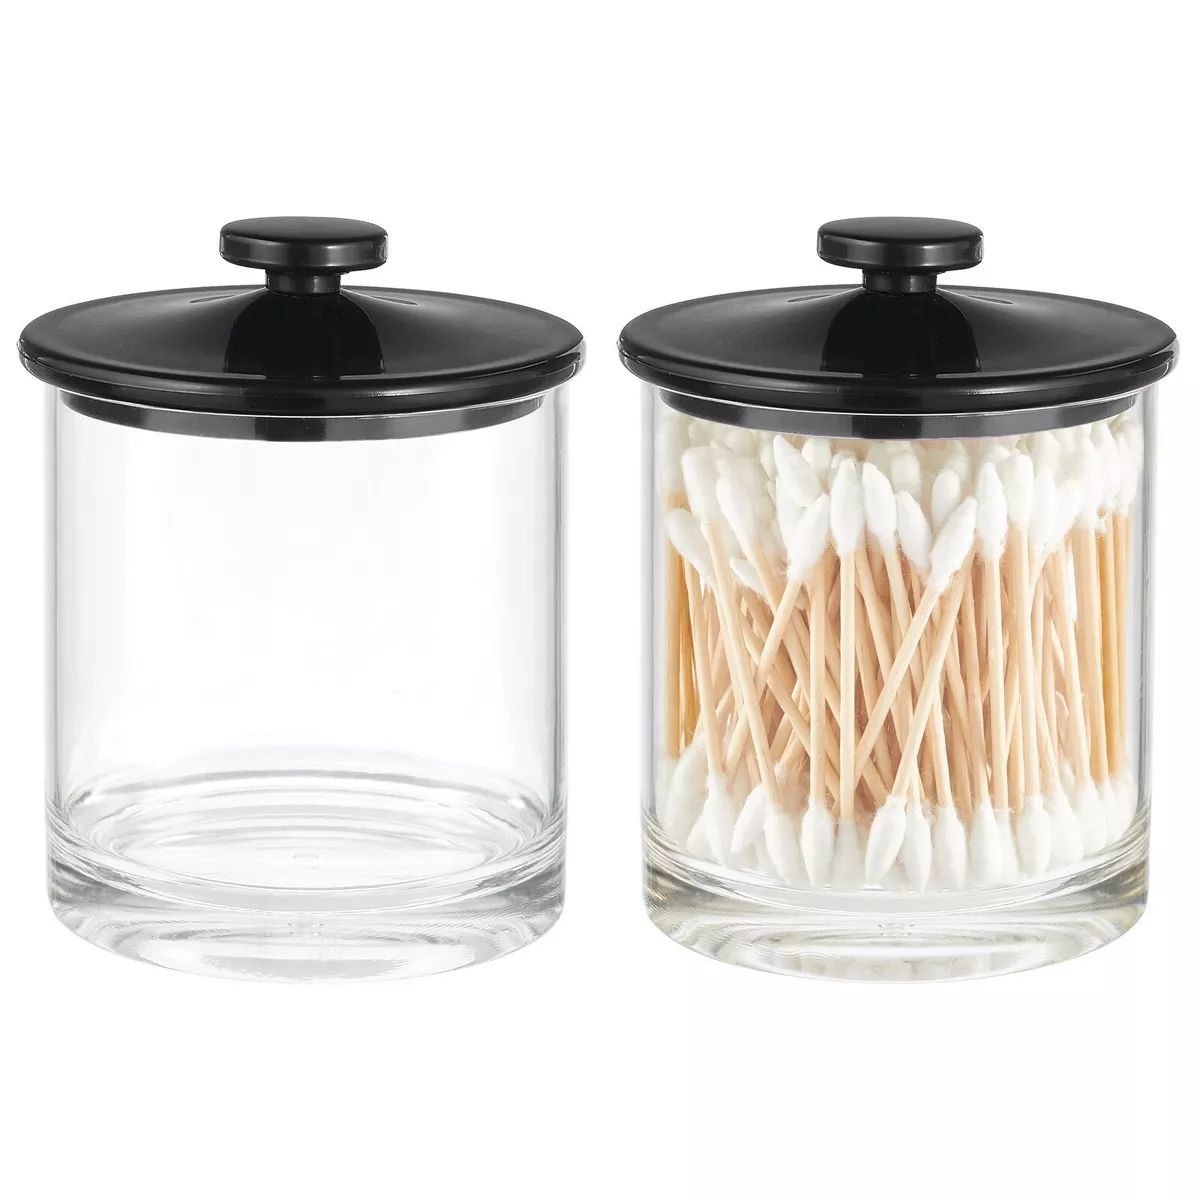 mDesign Round Acrylic Apothecary Canister Jars - 2 Pack | Target